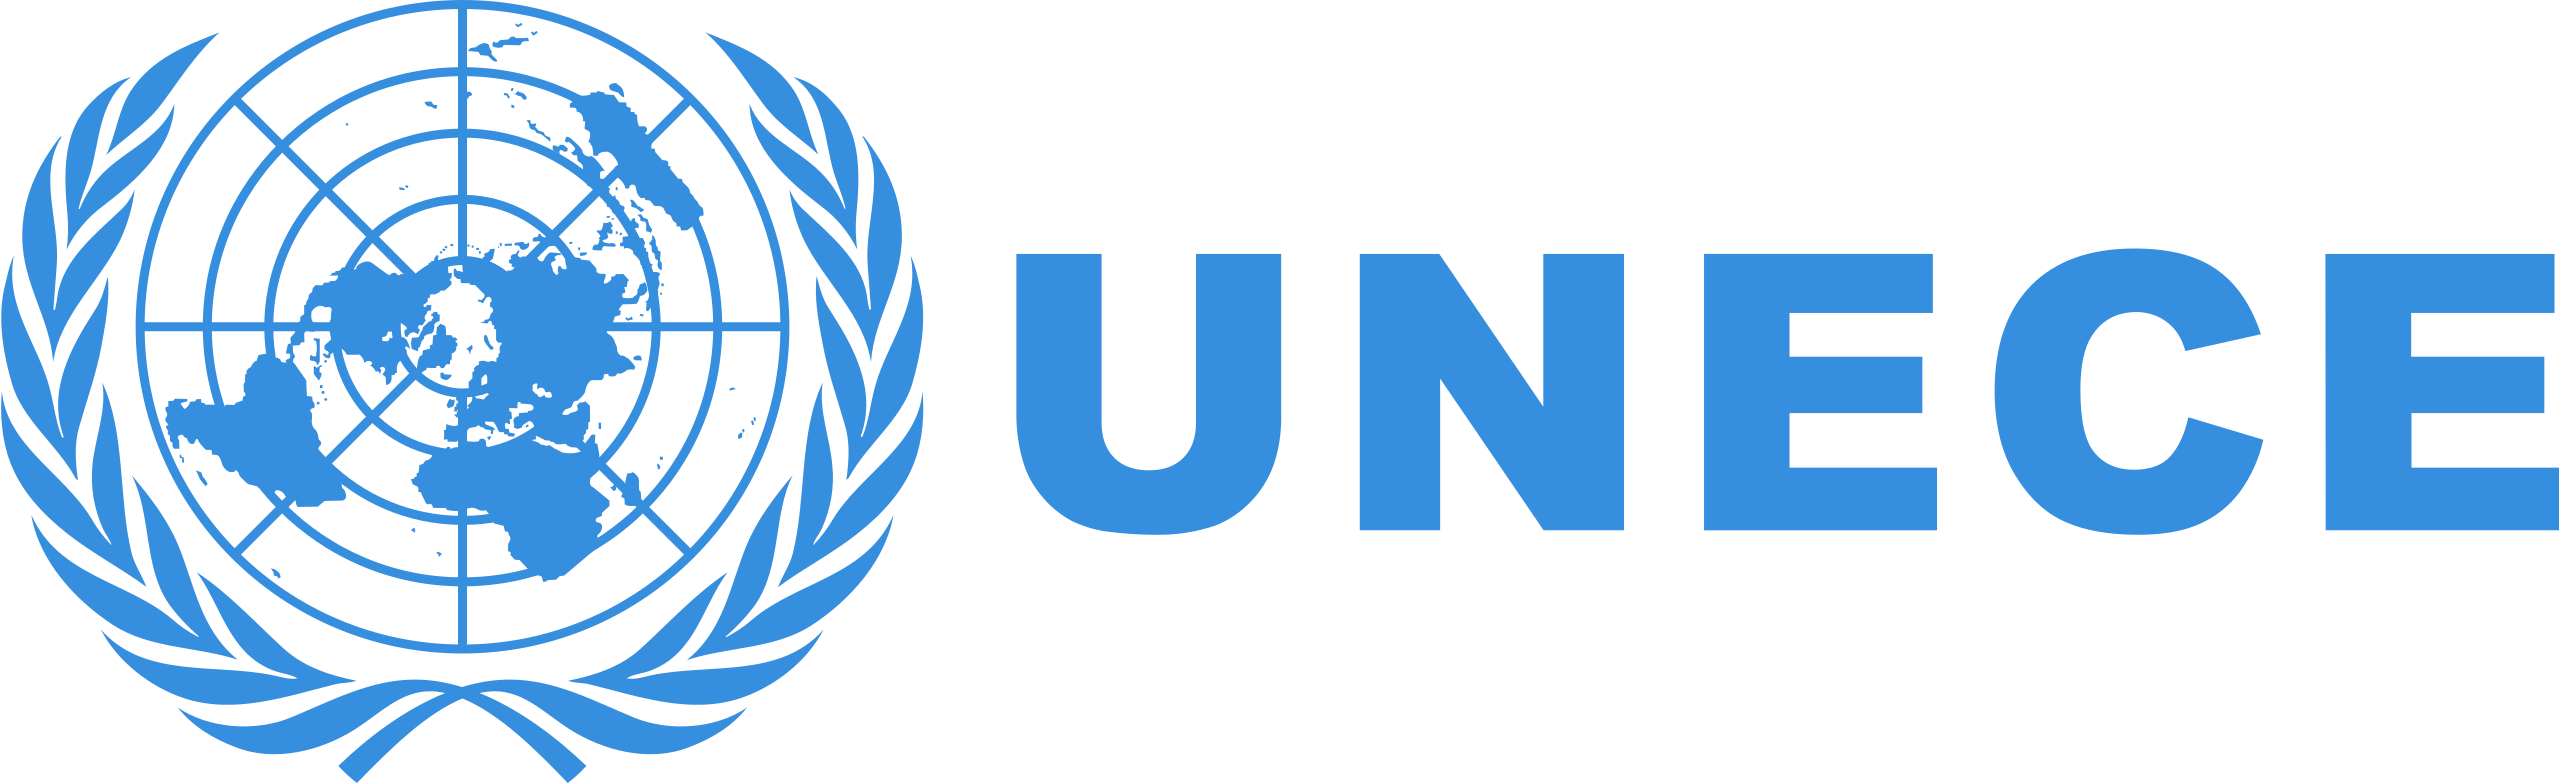 United Nations Economic Commission for Europe (UNECE)